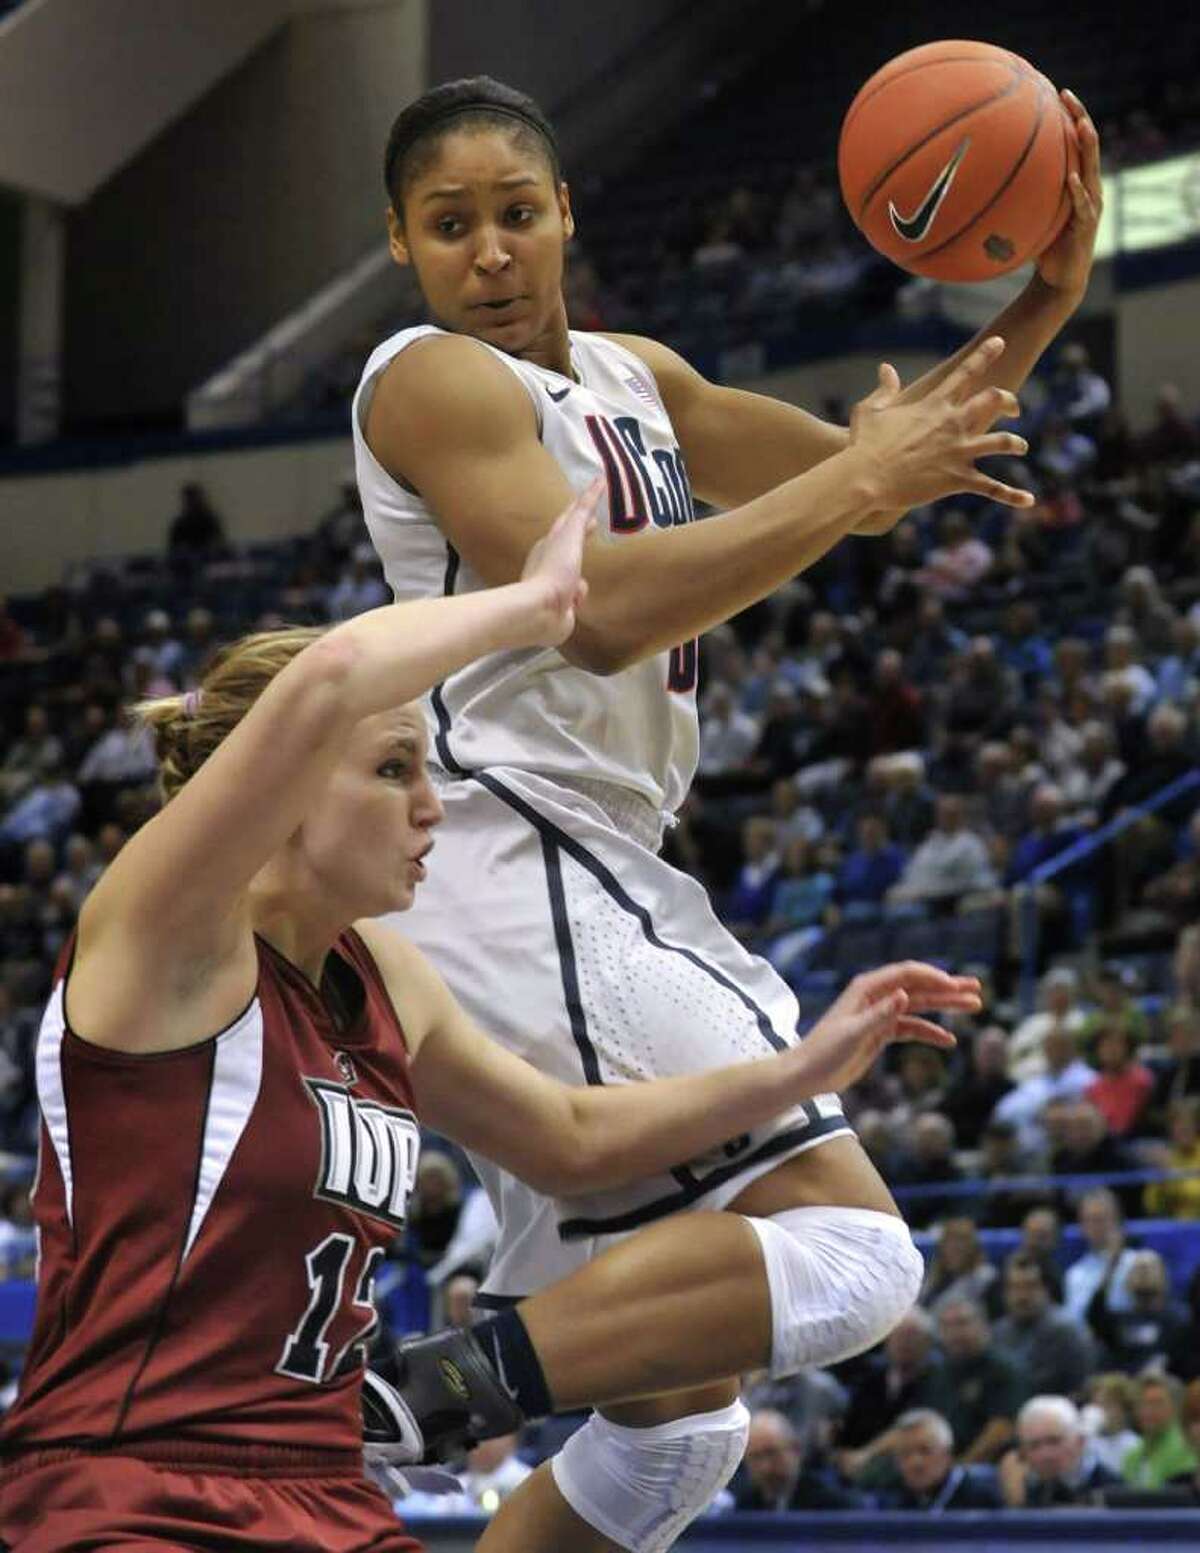 Connecticut's Maya Moore, top, drives to the basket while guarded by Indiana of Pennsylvania's Brianna Johnson during the first half of an NCAA college exhibition basketball game in Hartford, Conn., Wednesday, Nov. 10, 2010. (AP Photo/Jessica Hill)